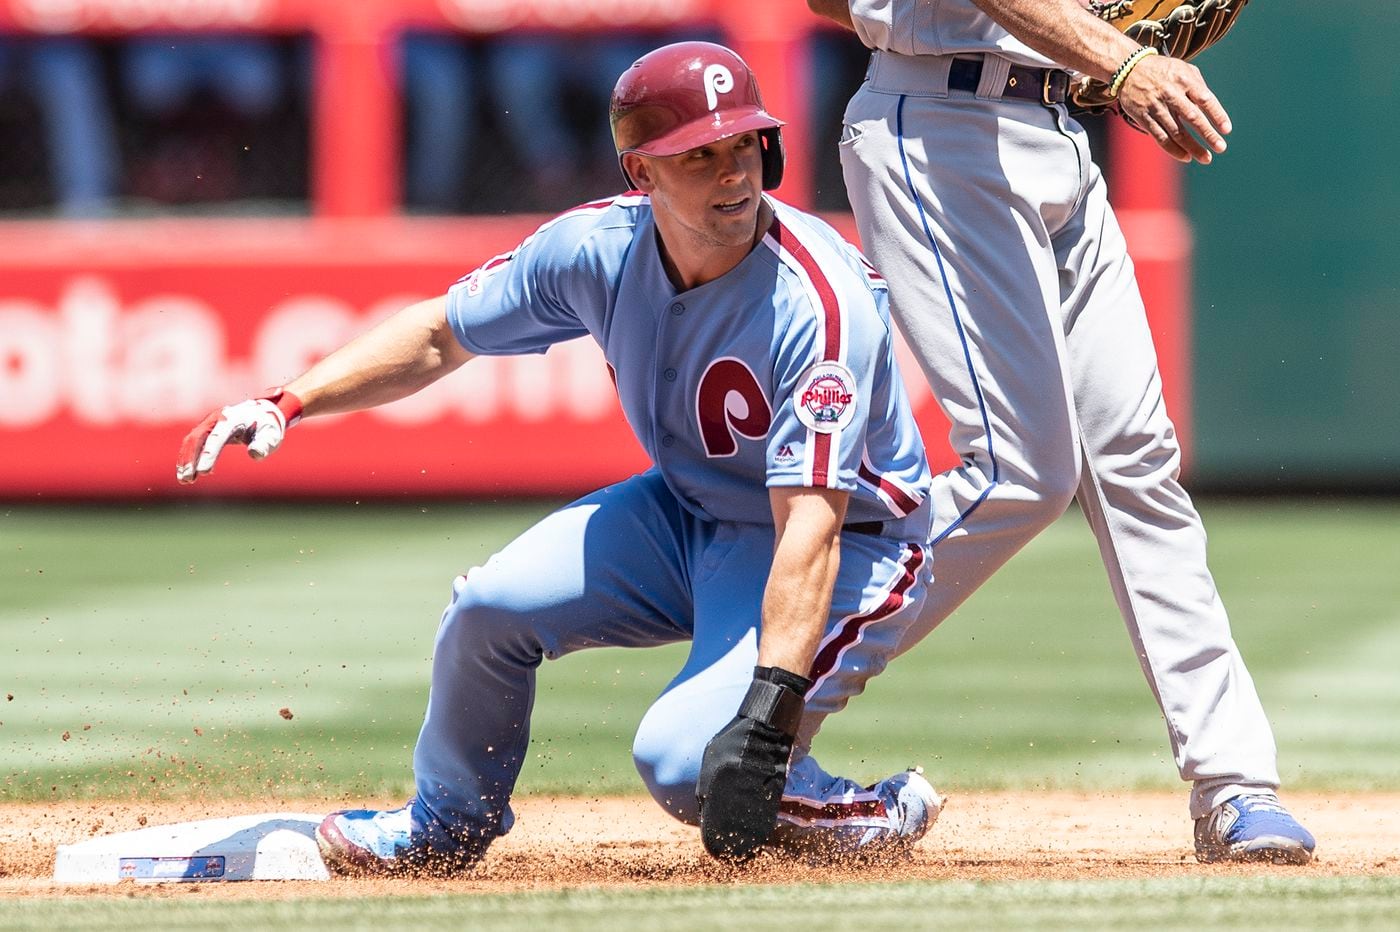 Scott Kingery is filling the Phillies’ leadoffhitting void, but middle